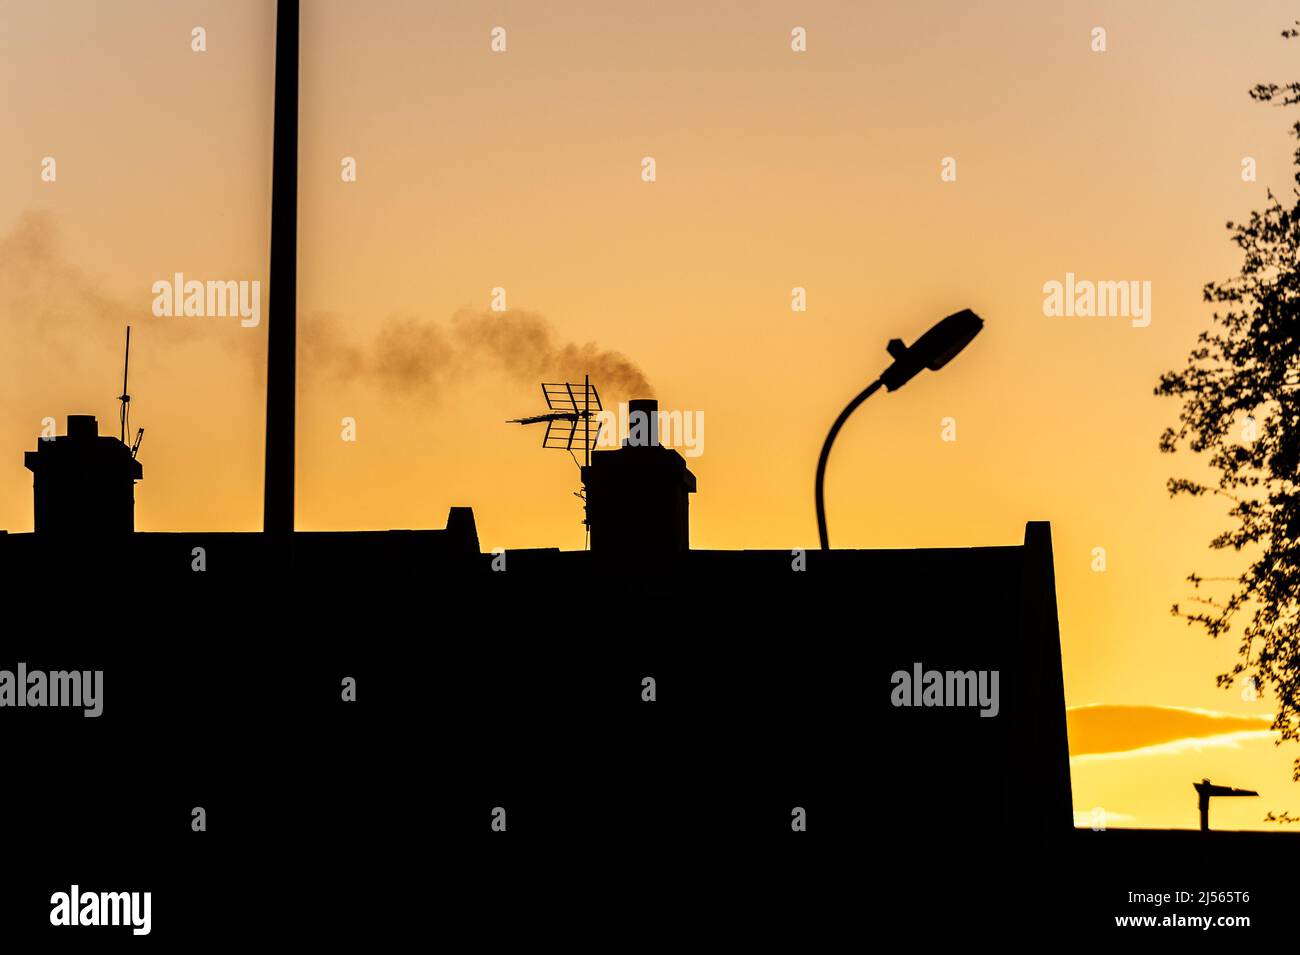 Smoke rising from a house chimney in Ireland at sunset. Stock Photo